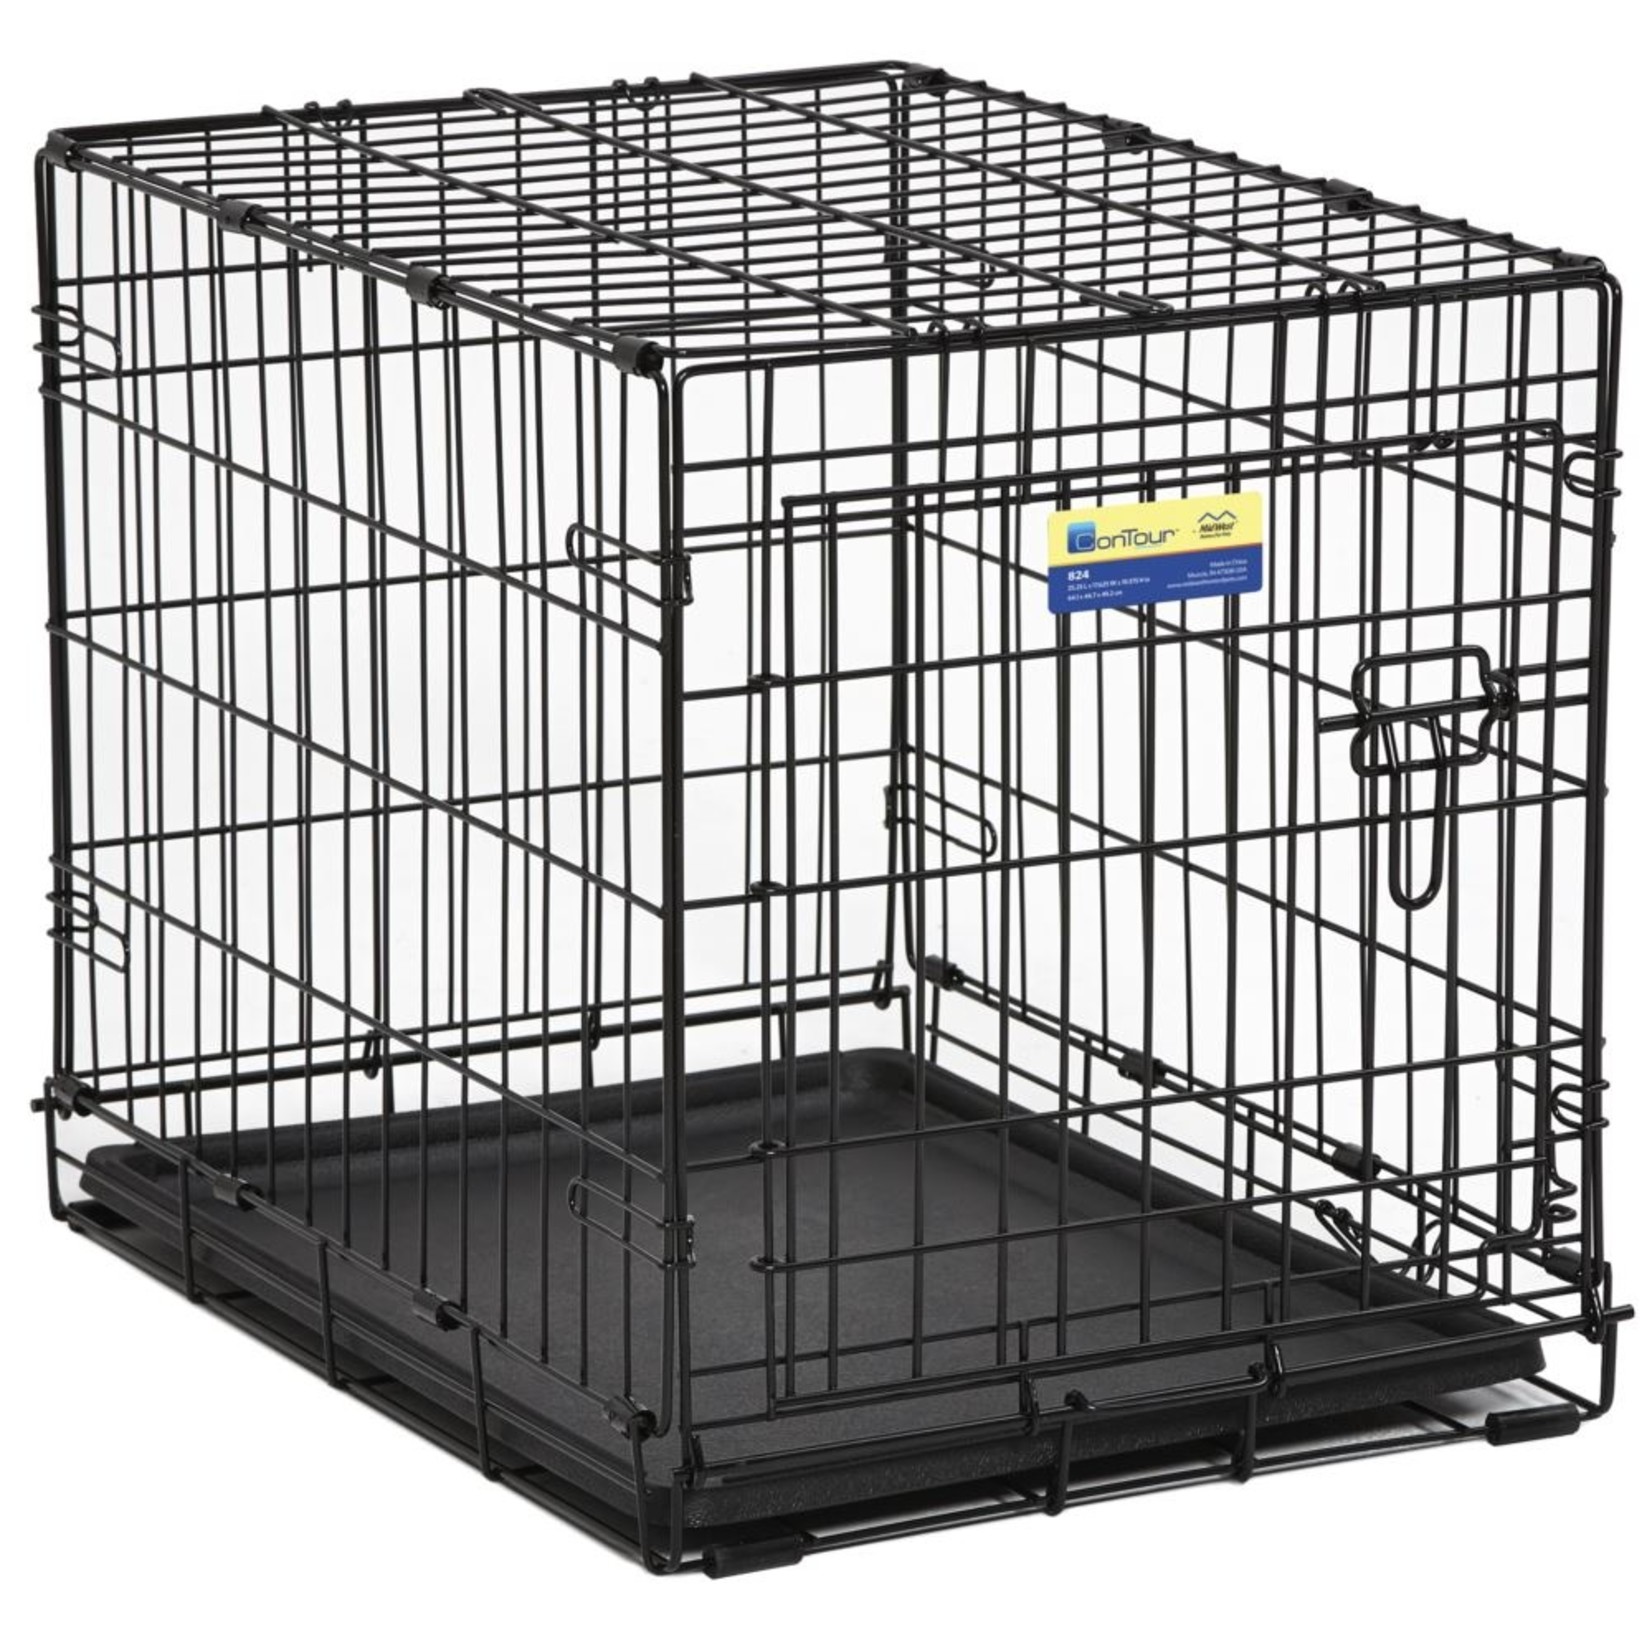 Midwest Homes for Pets Midwest Homes for Pets Contour Dog Crate 24in